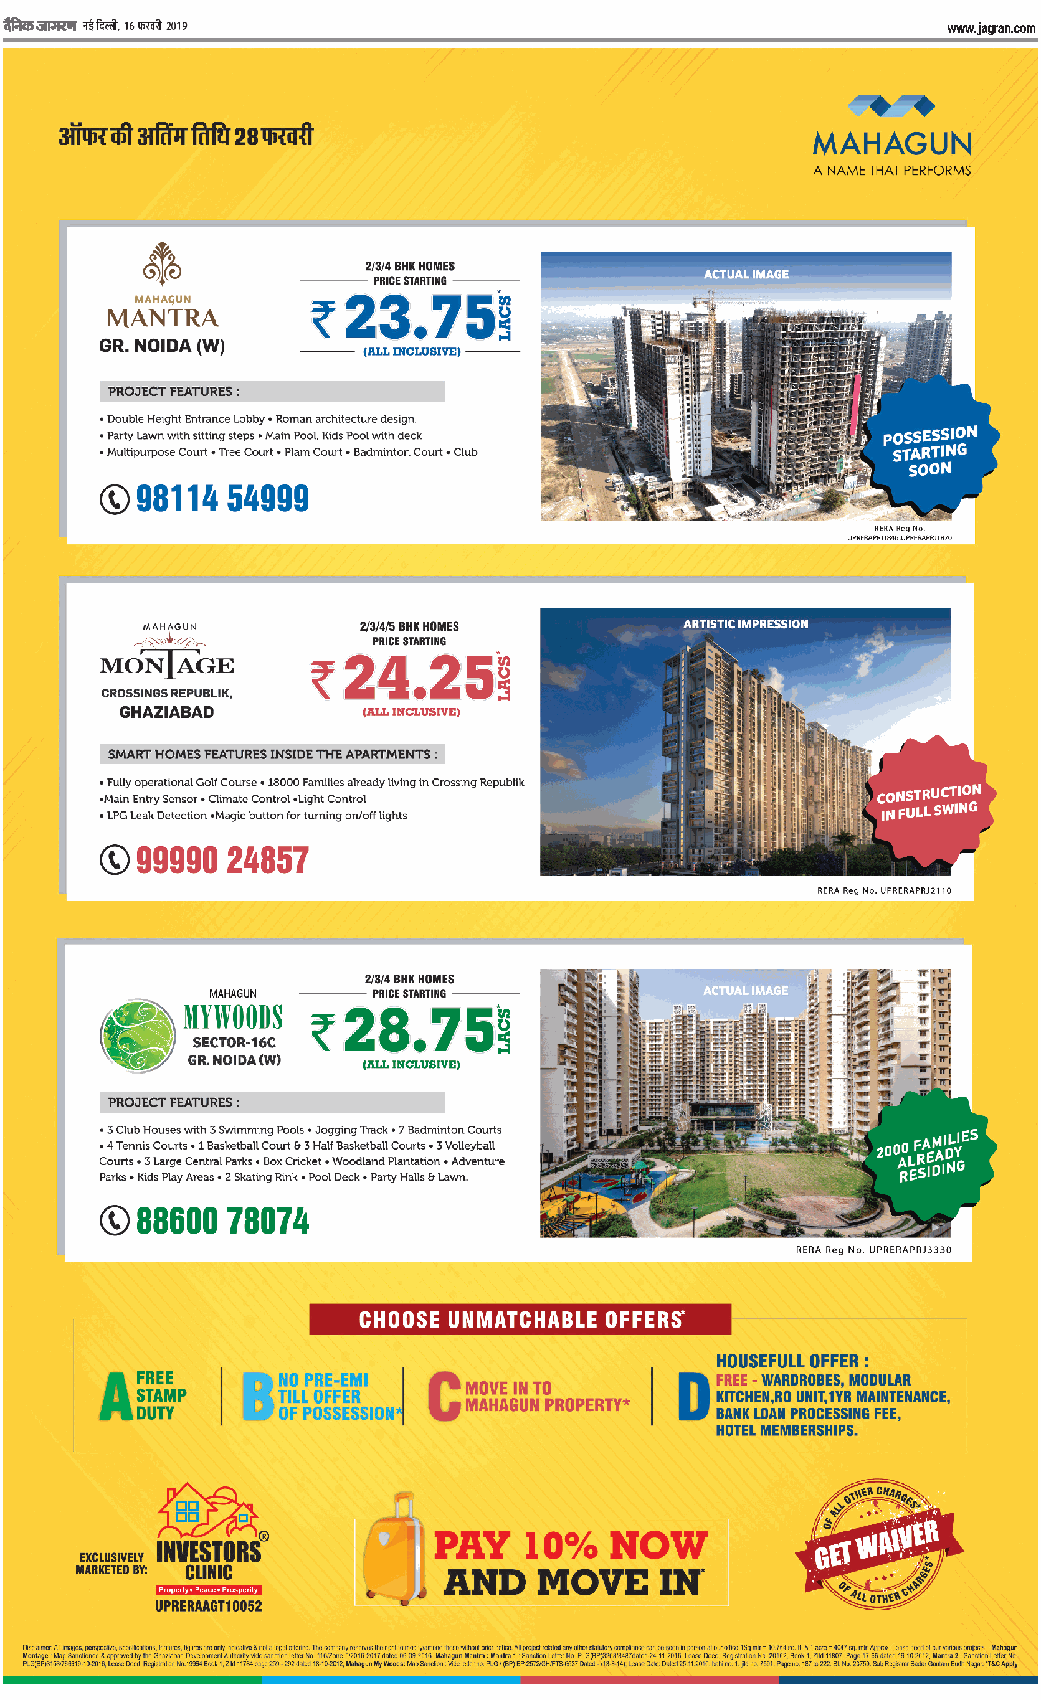 Mahagun Homes Mantra Pay 10% Now And Move In Ad - Advert Gallery